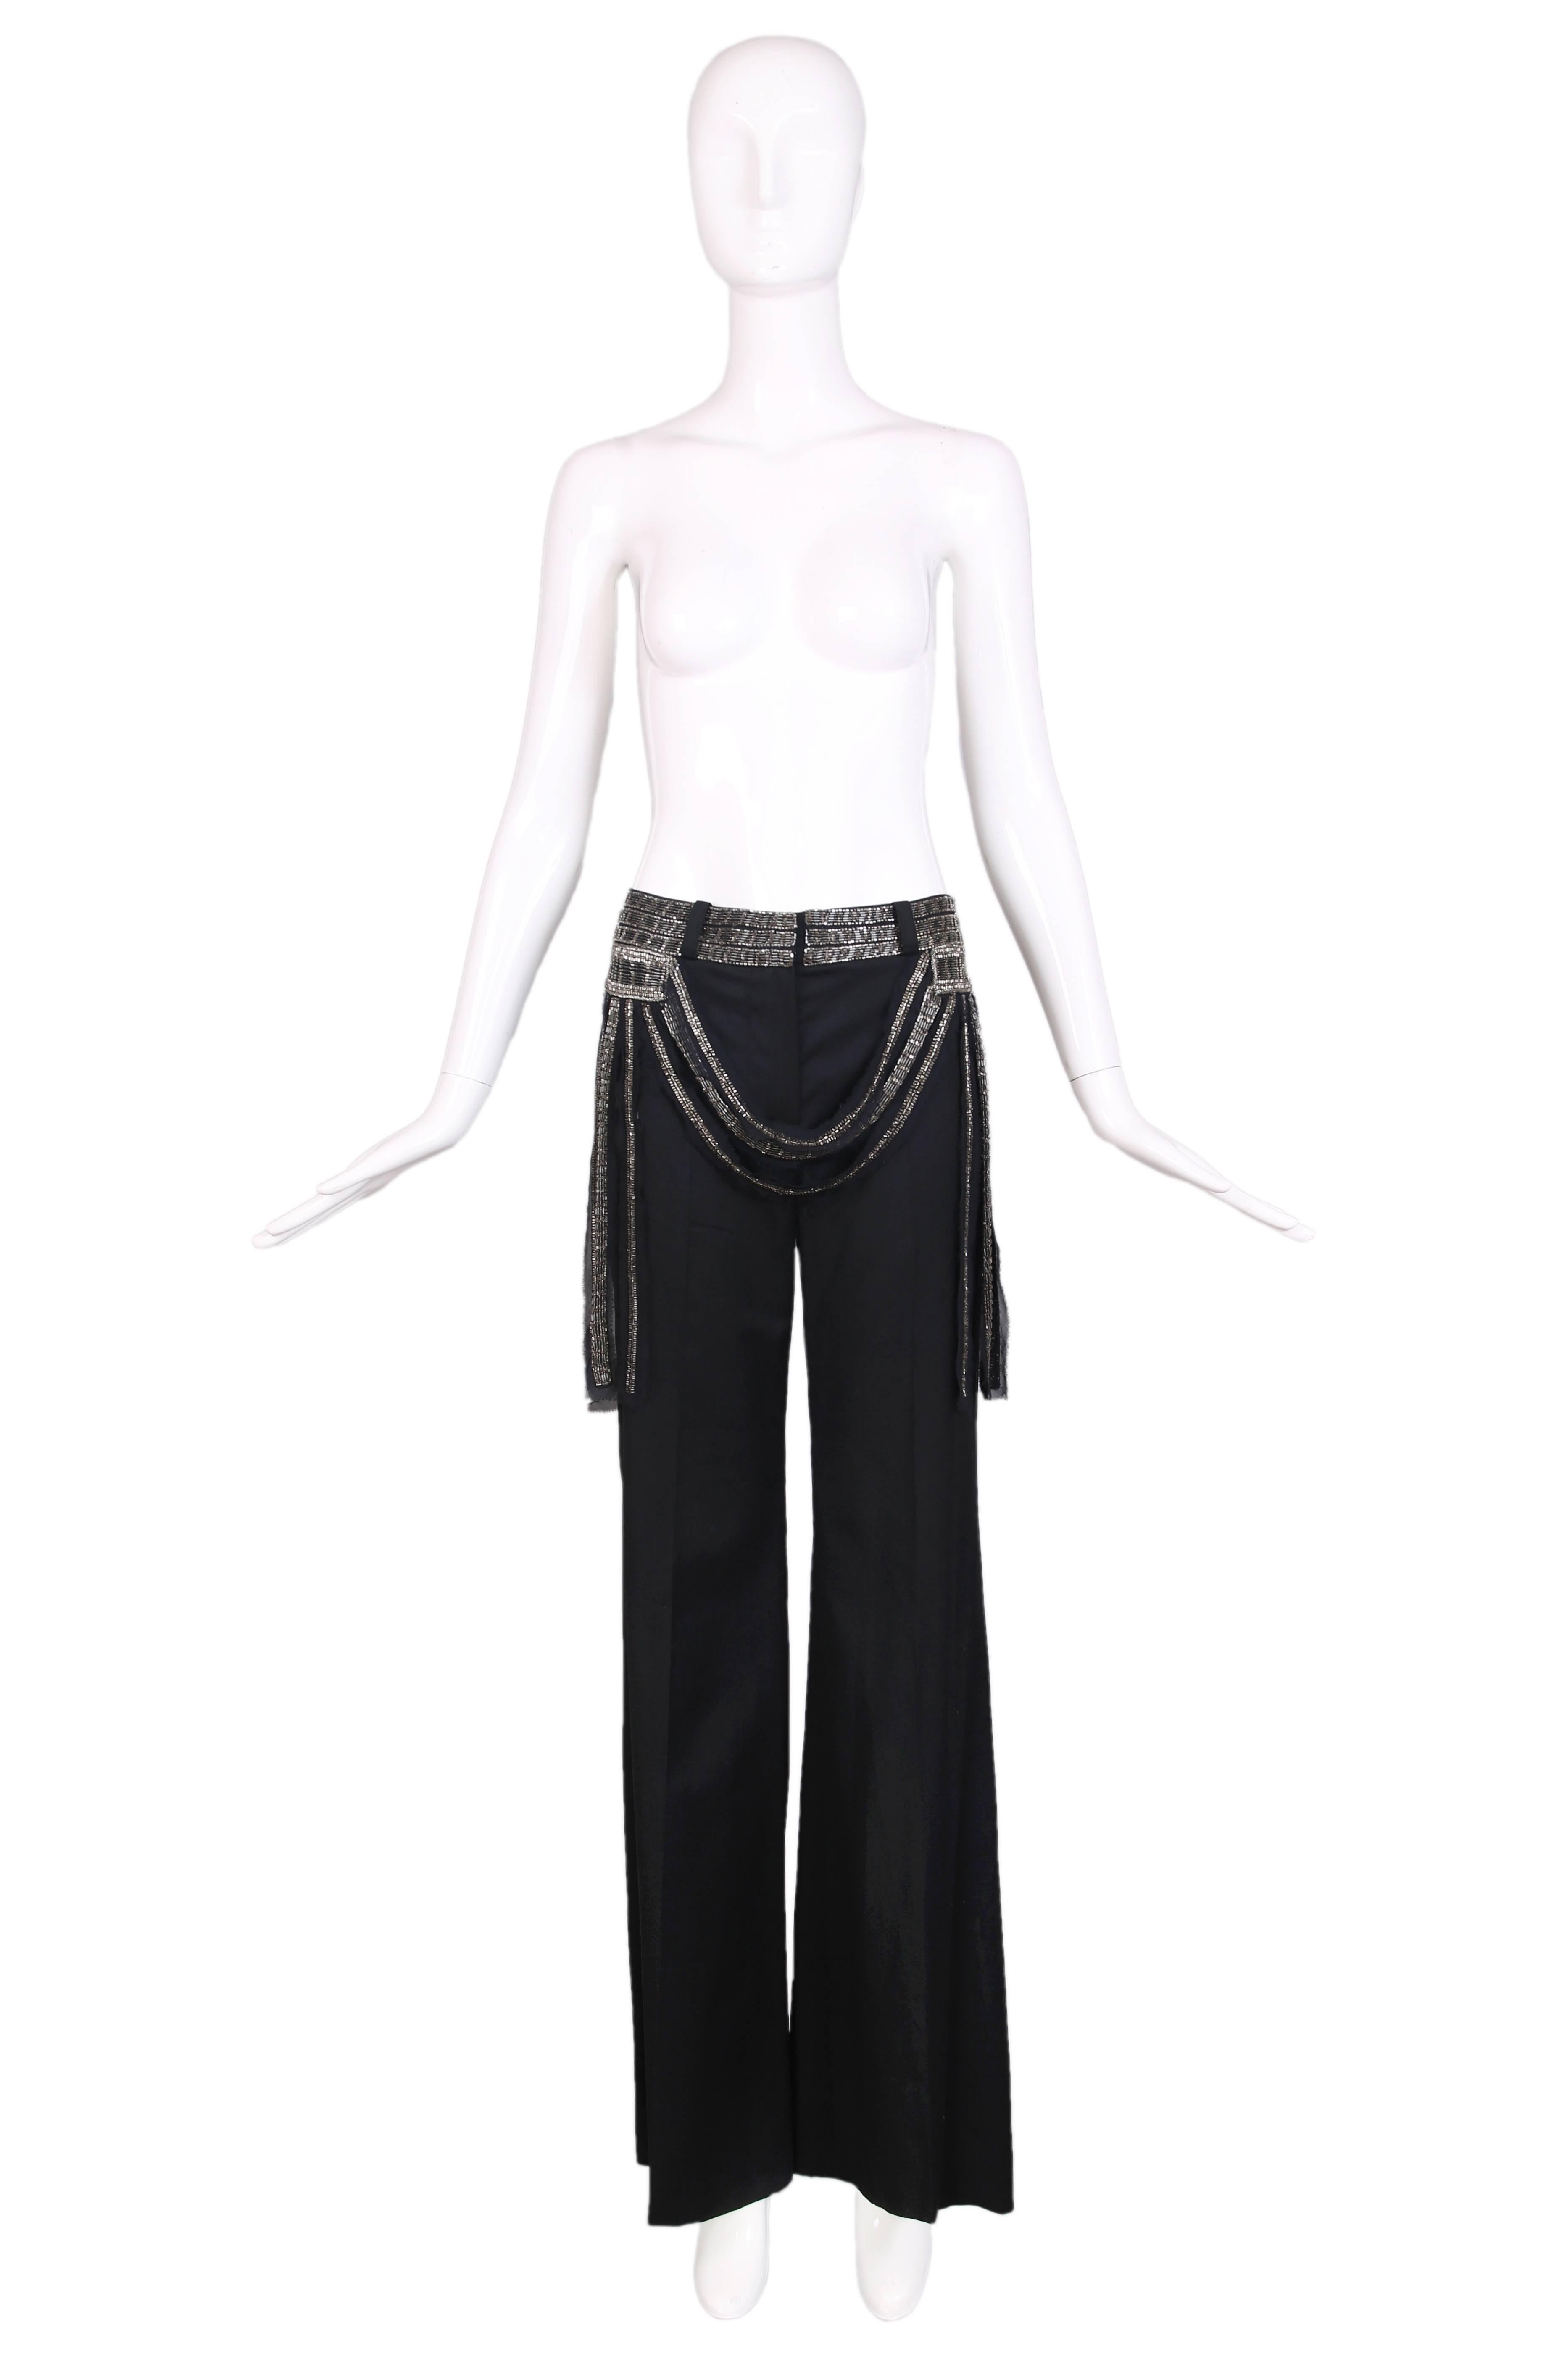 2002 Chloe by Stella McCartney black slightly flared trouser pants featuring a silver bugle bead-encrusted waistband. In excellent condition. Size EU 36.
MEASUREMENTS:
Waist - 30